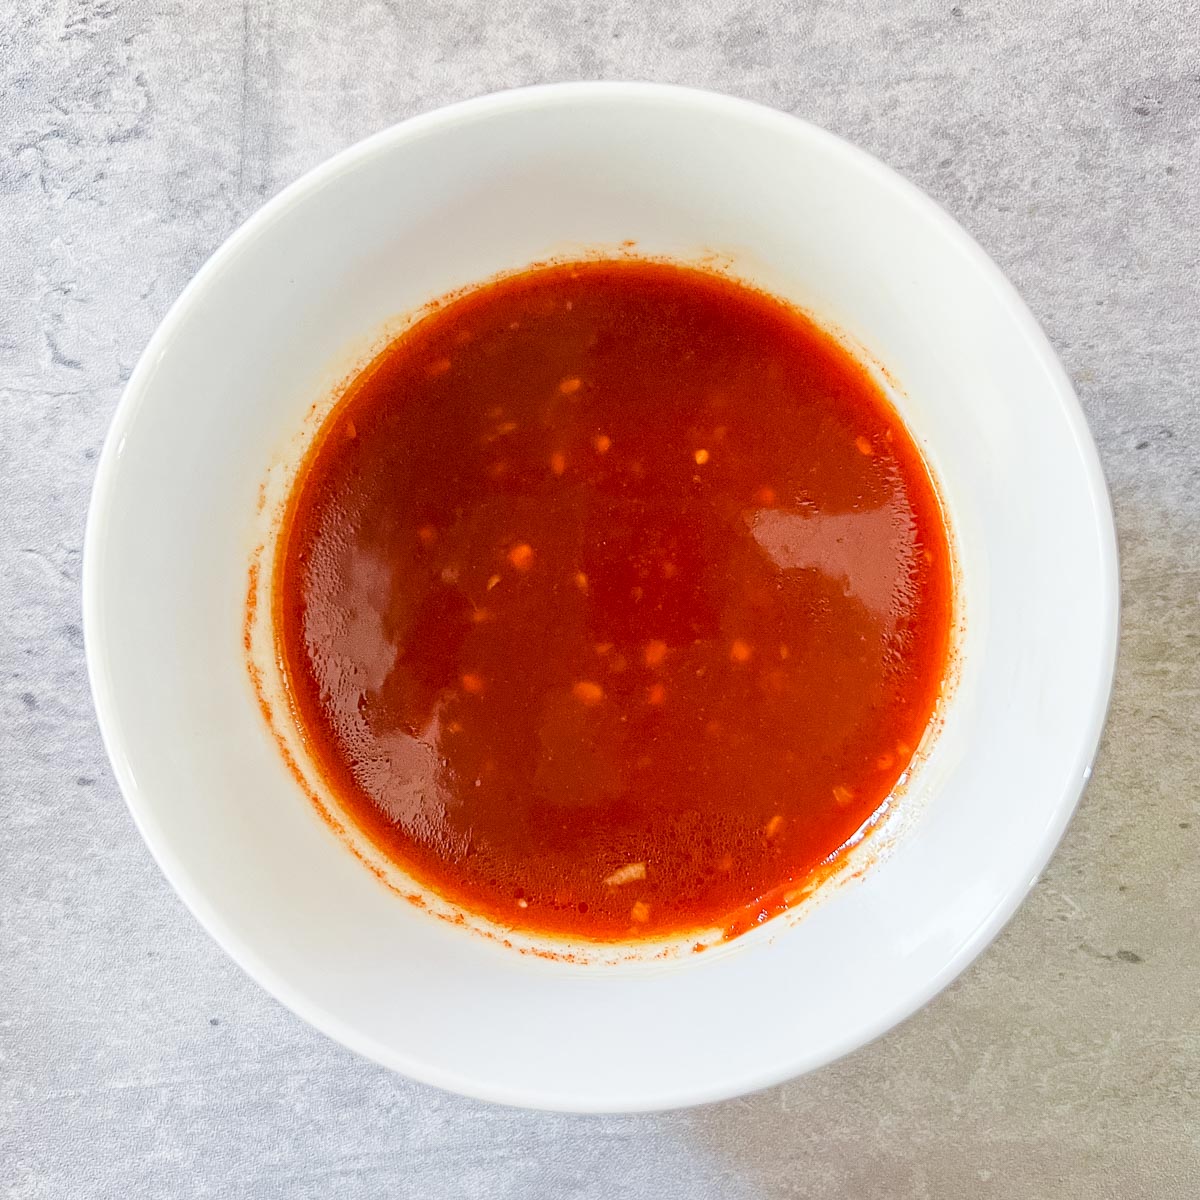 Spicy Korean sauce for the noodles in a white bowl